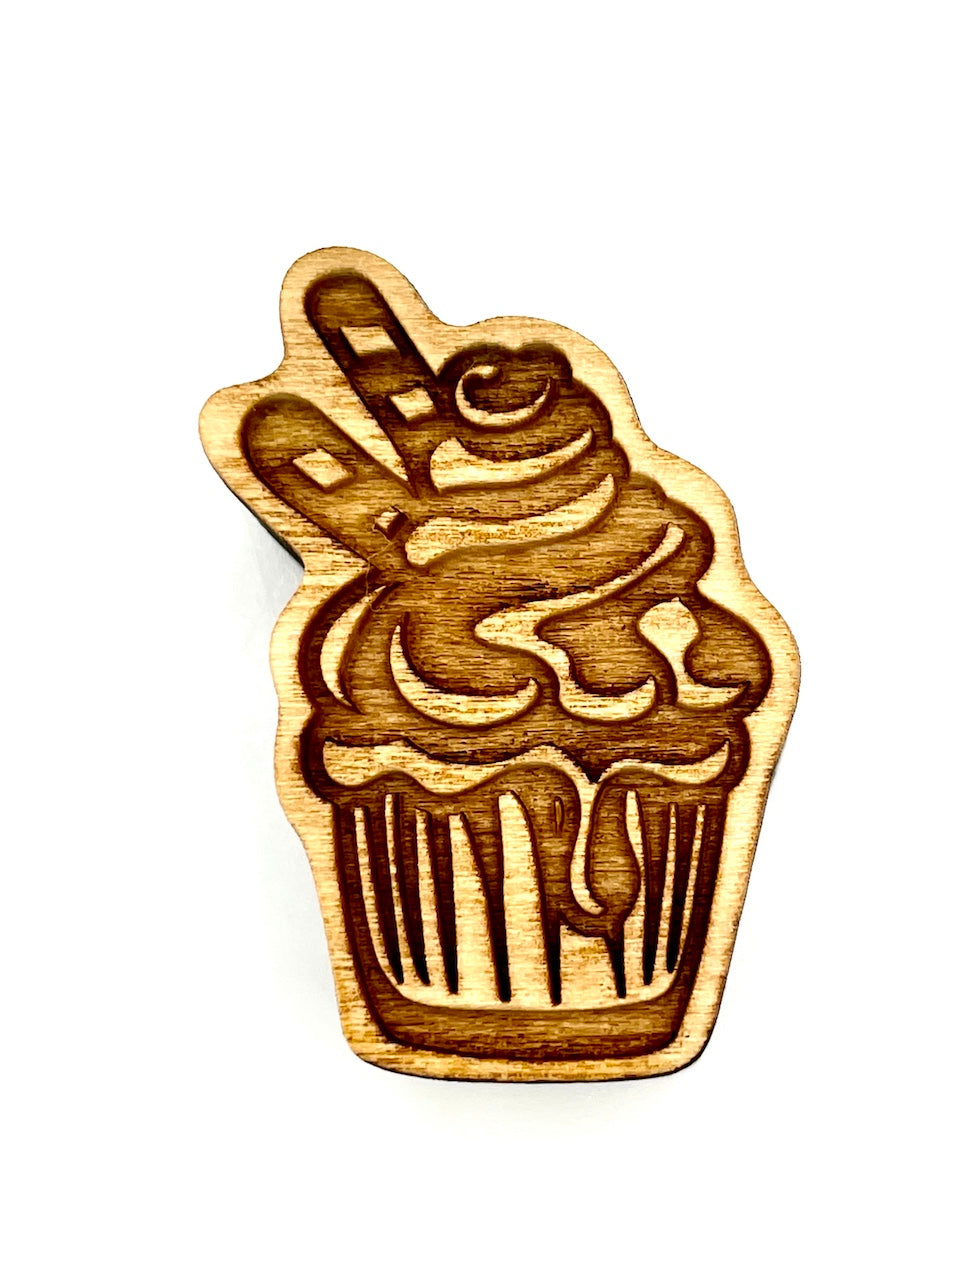 Cupcake with Candy Sticks- Stamp